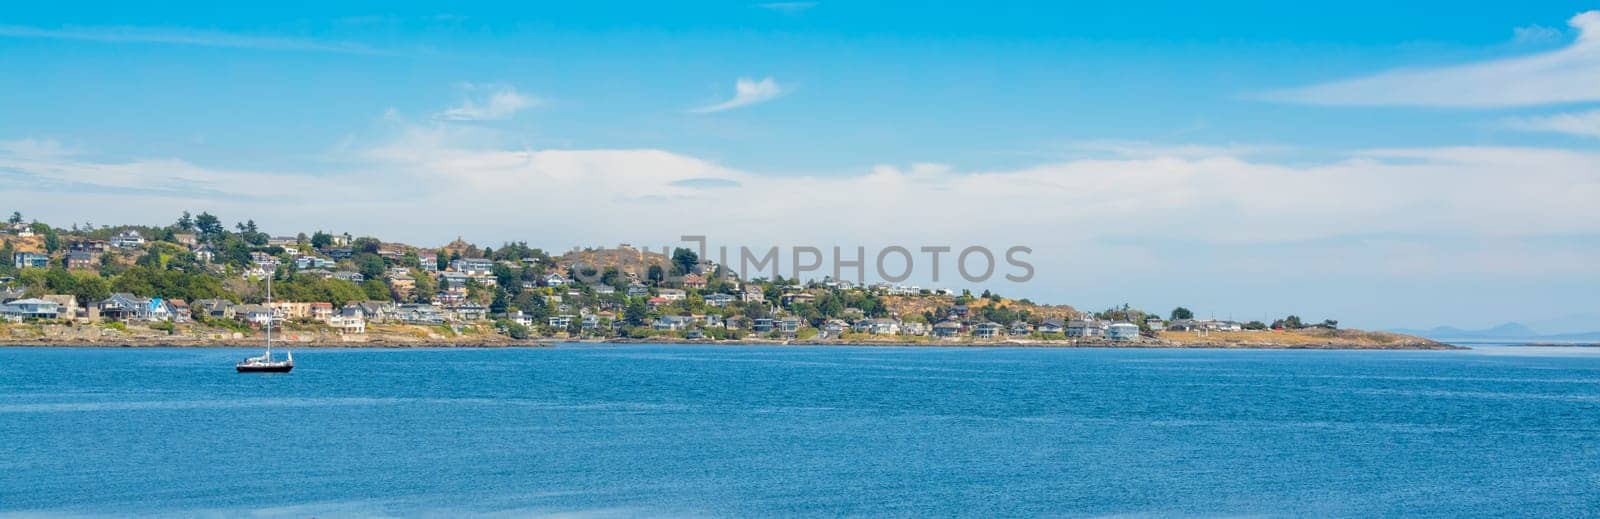 Panoramic view of residential area at waterfront in Victoris city, Canada by Imagenet